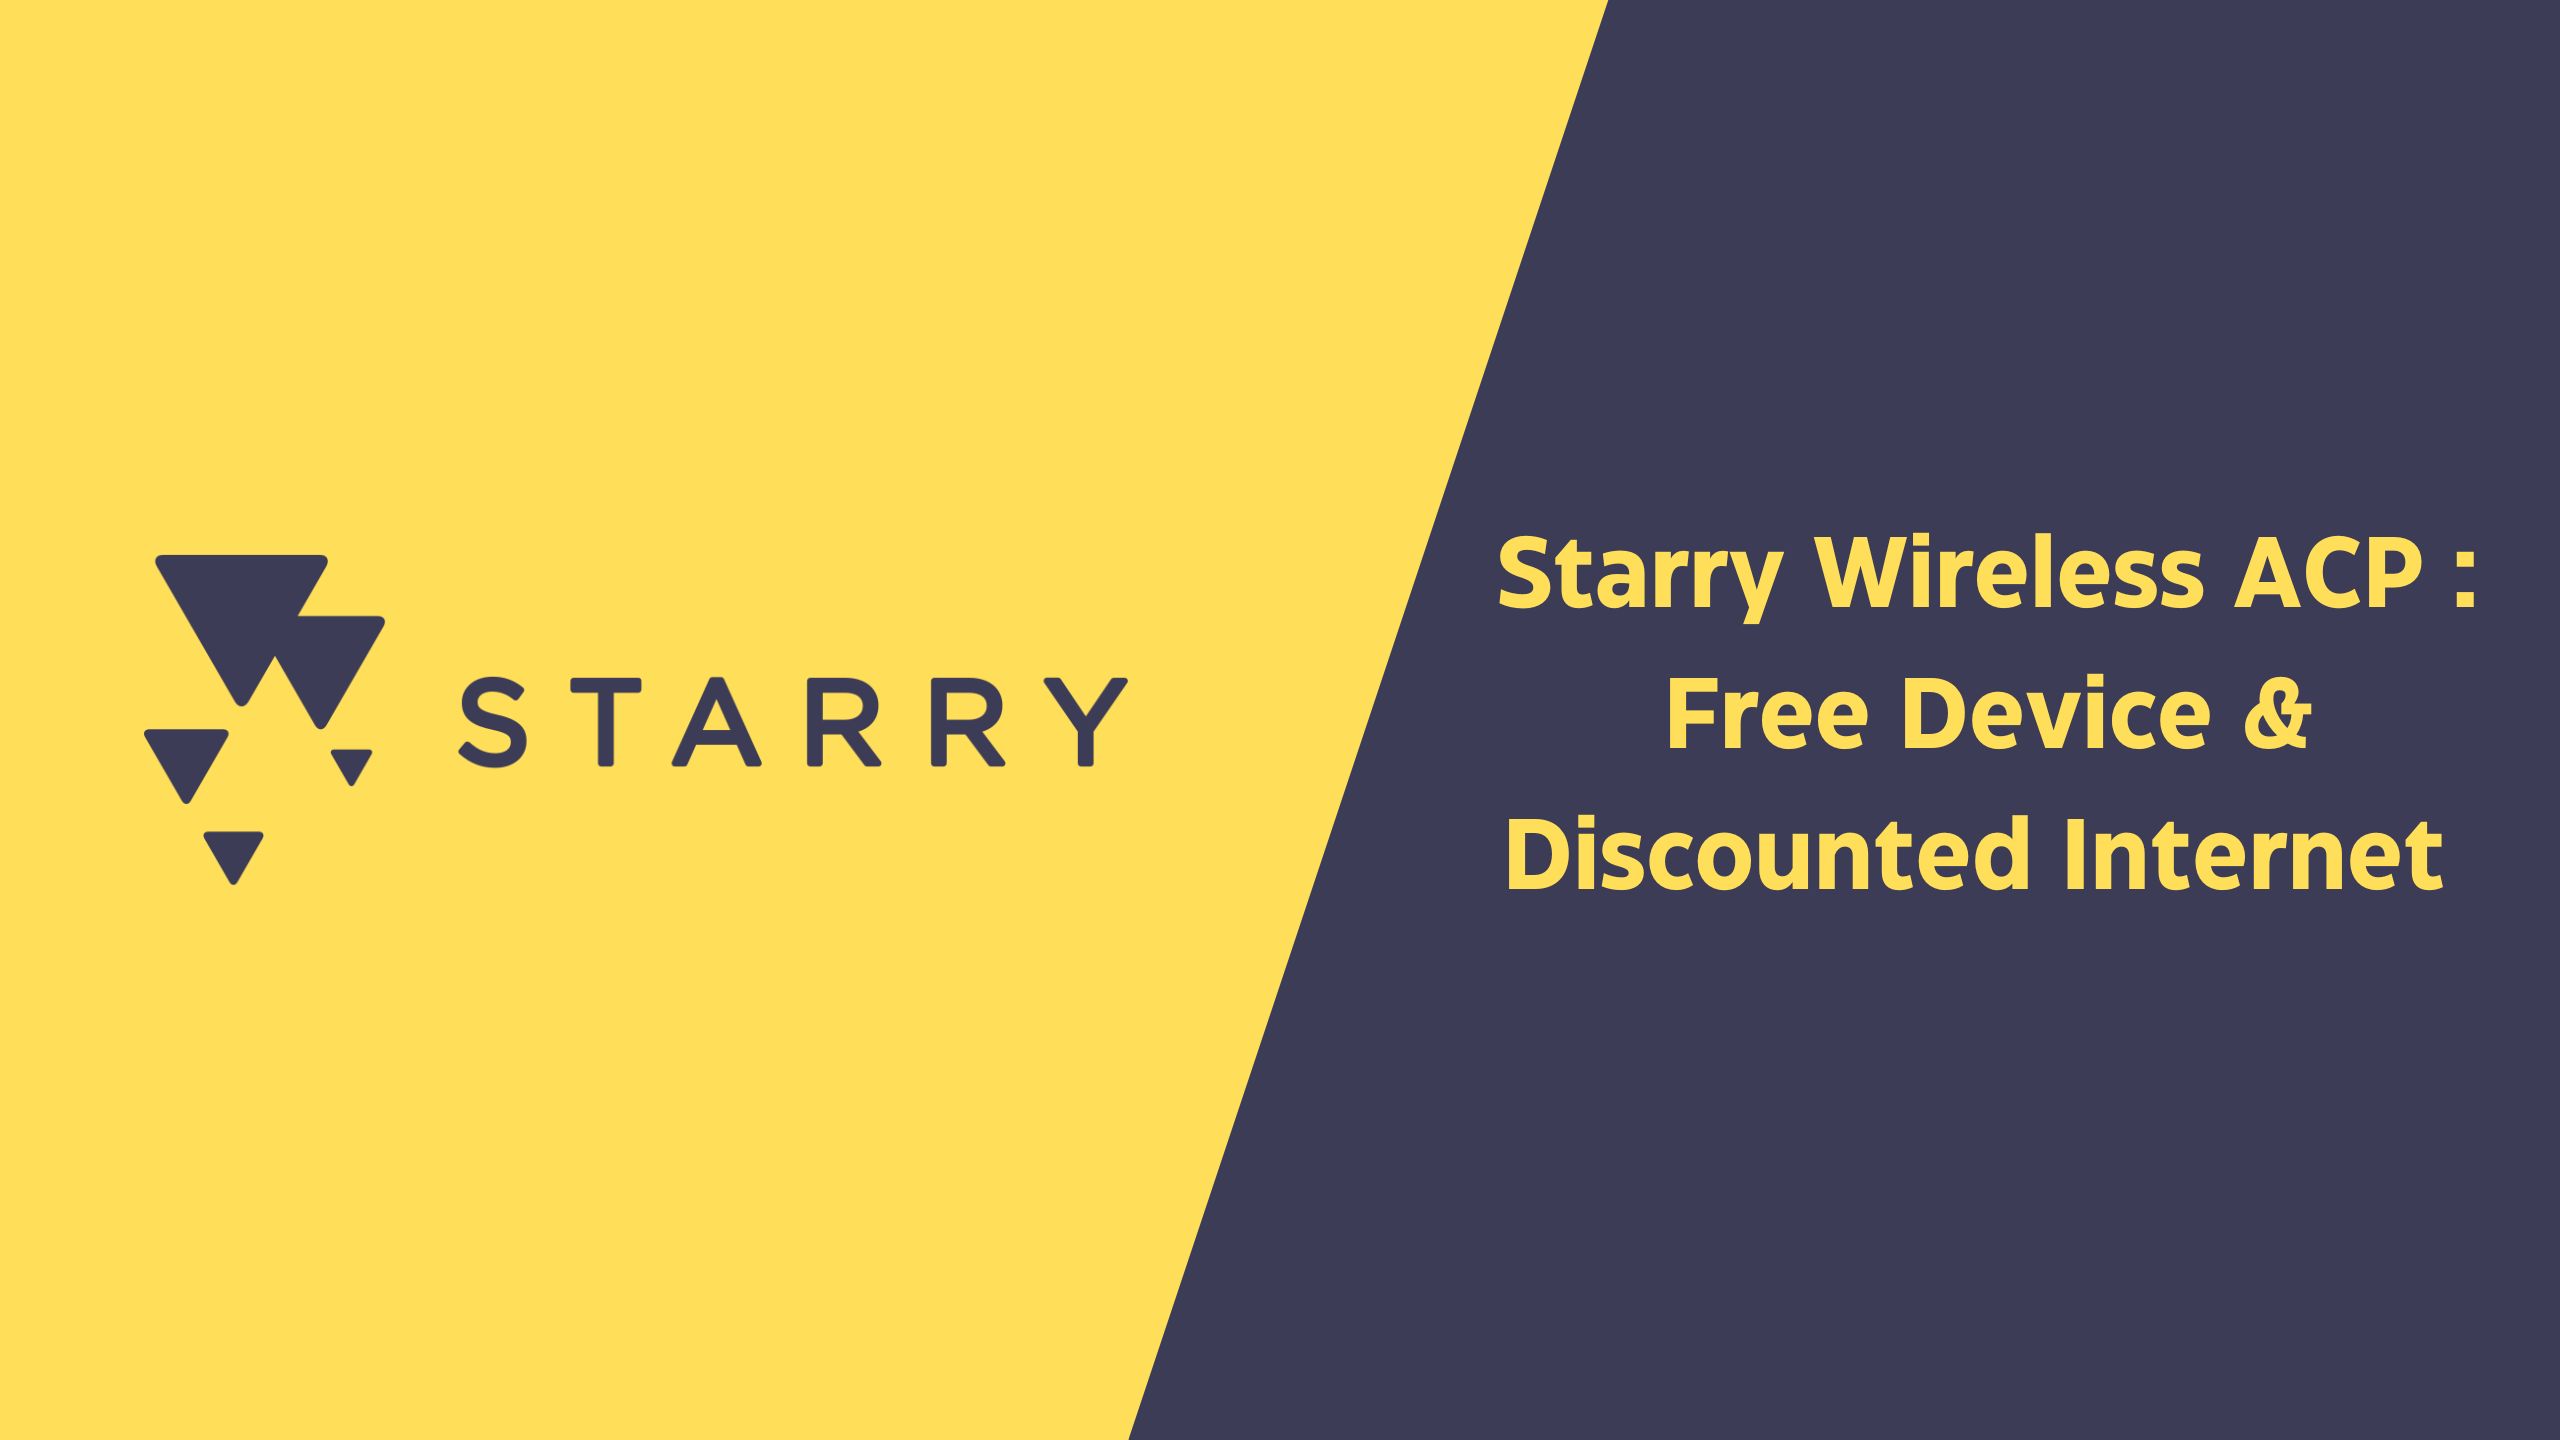 Starry Wireless Affordable Connectivity Program : Free Device and Discounted Internet Service